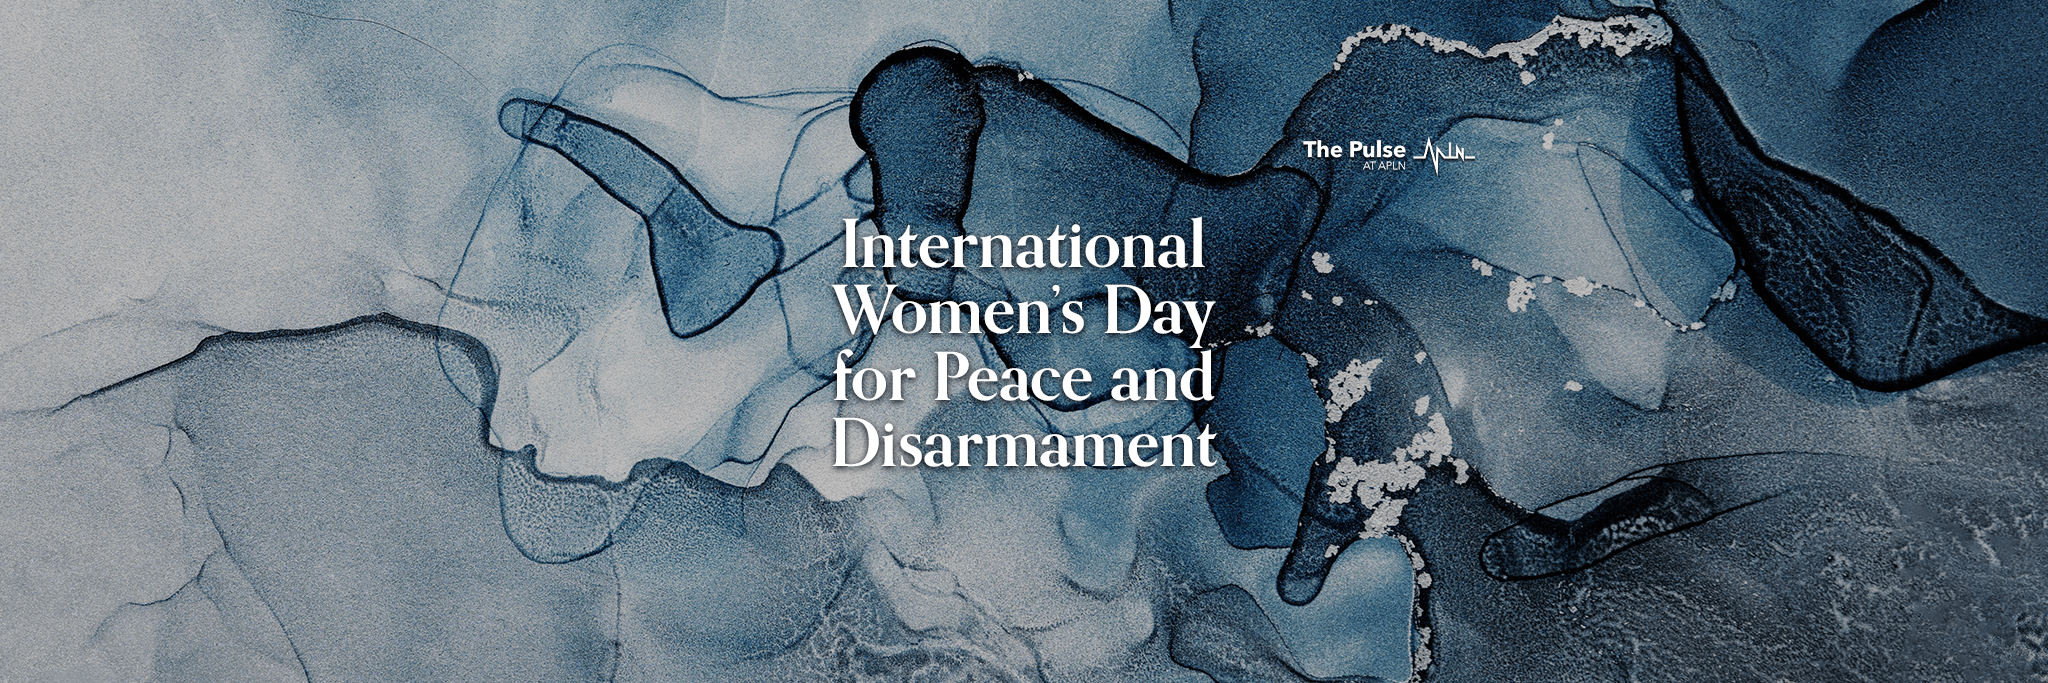 International Women’s Day for Peace and Disarmament